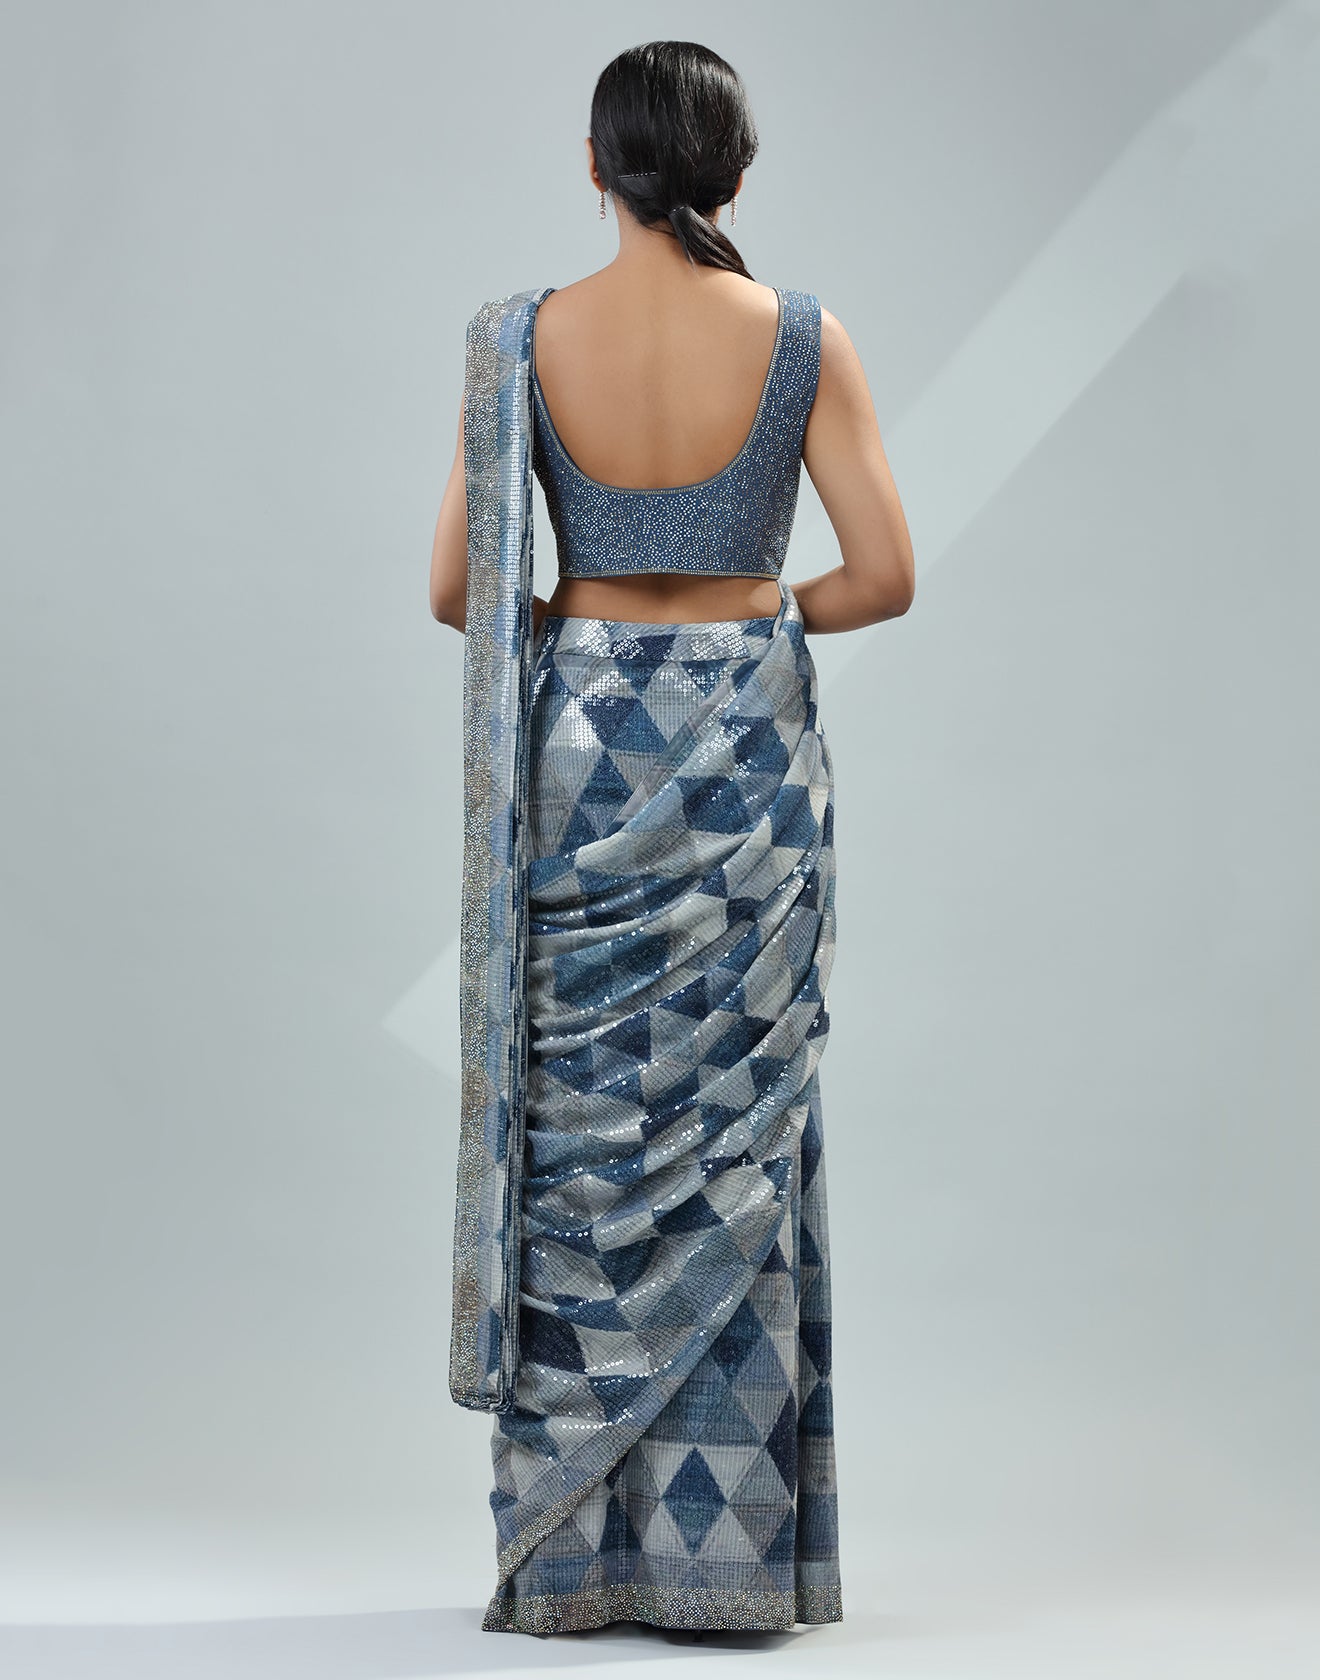 Ice Blue Geometric Pattern Pre-Stitched Saree With Embellished Blouse